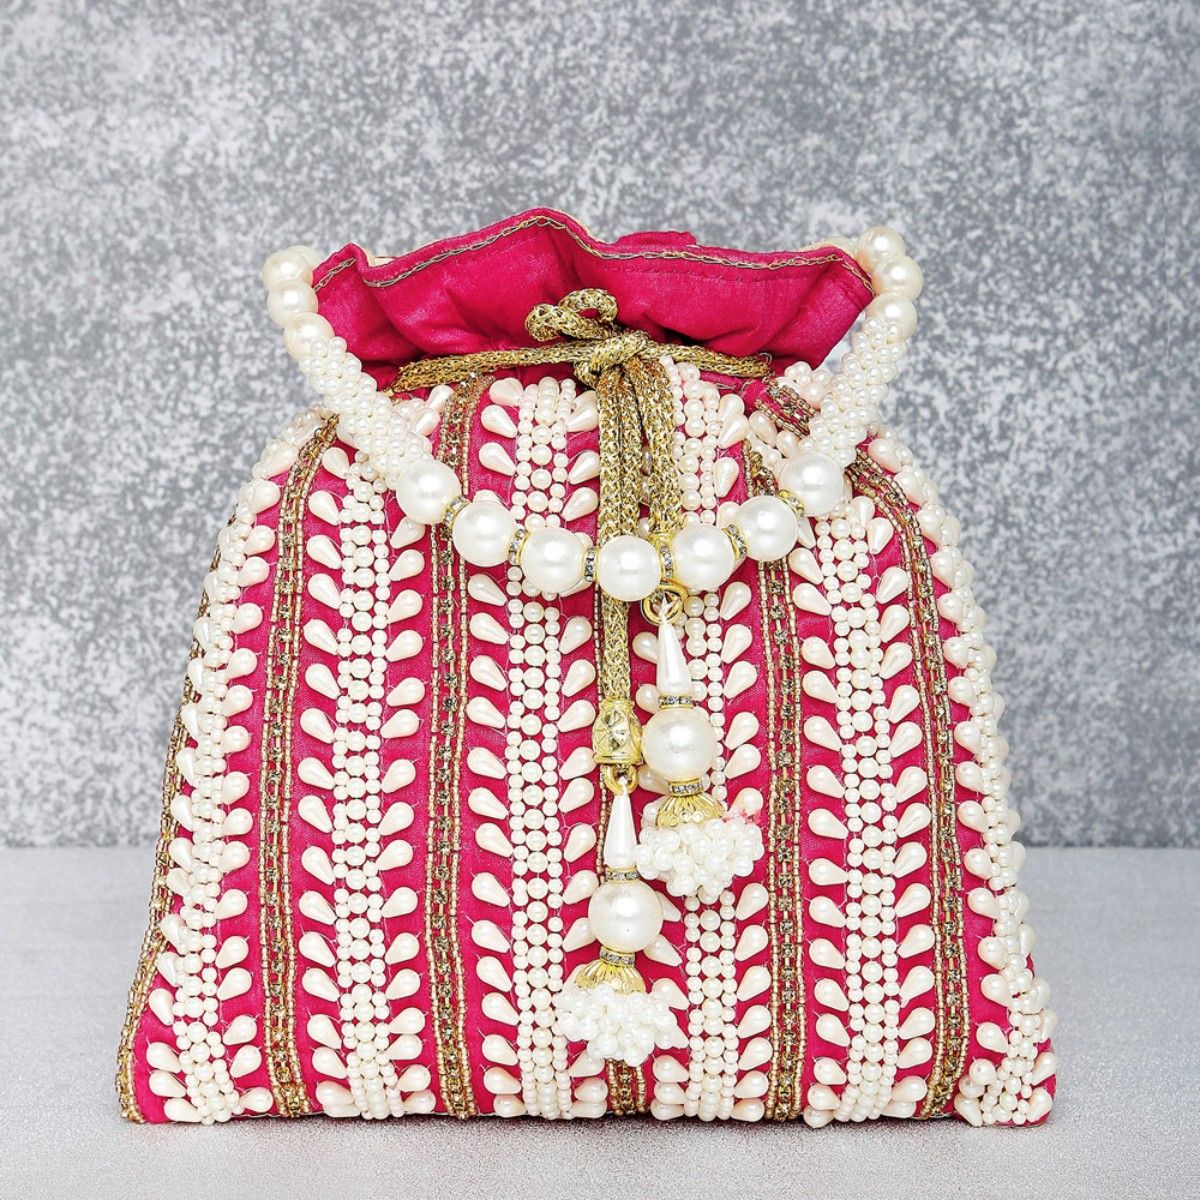 Peora Cream Potli Bags for Women Evening Bag Clutch Ethnic Bride Purse with  Drawstring(P82CRM) : Amazon.in: Fashion